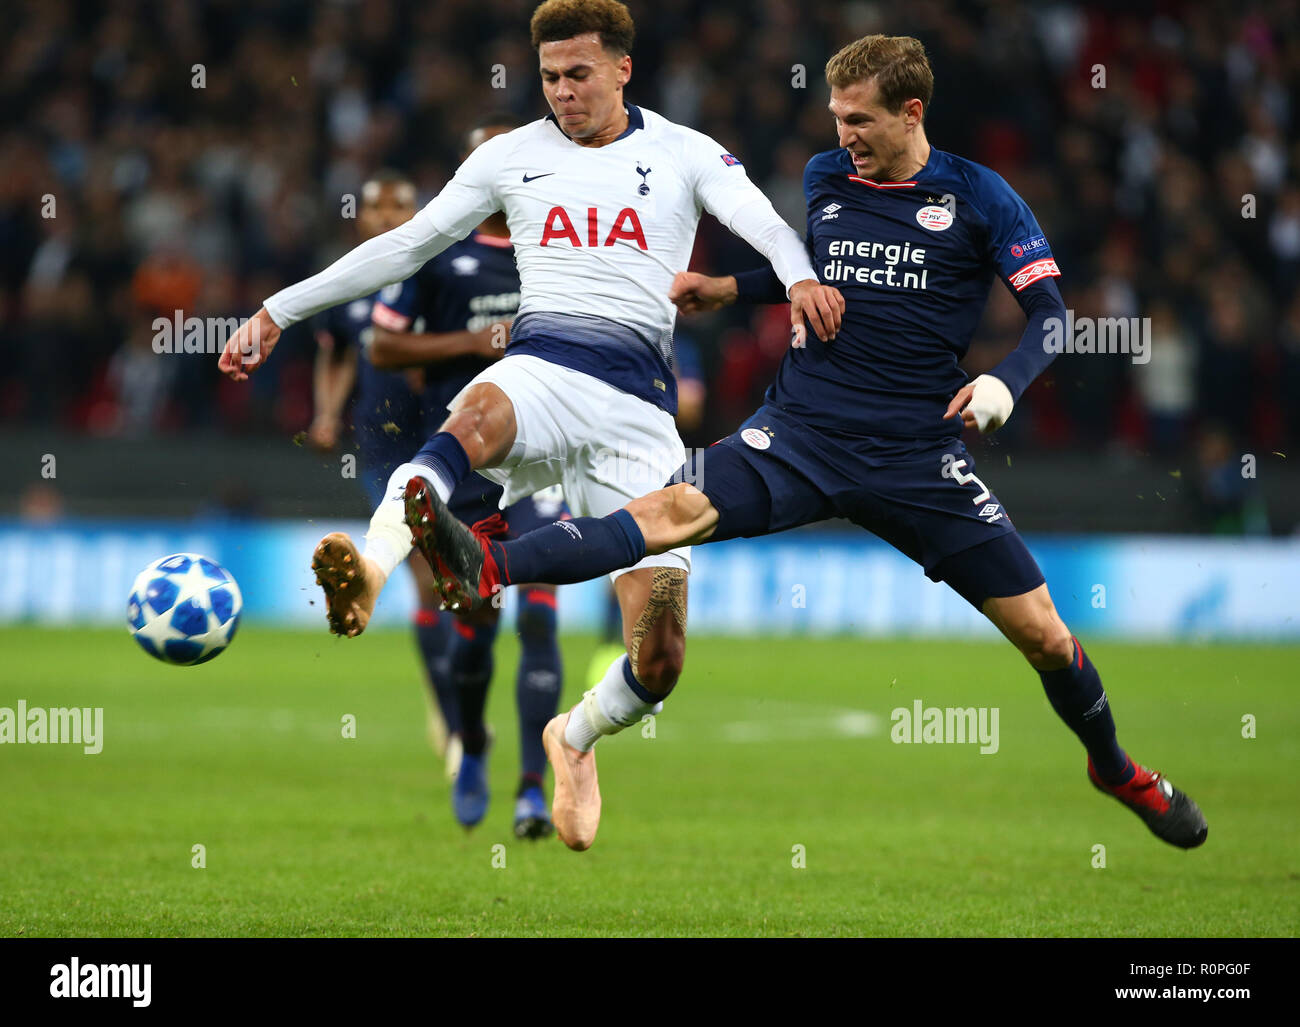 London, England, 06th November 2018.  L-R Tottenham Hotspur's Dele Alli and Daniel Schwaab of PSV Eindhoven  during Champion League Group B between Tottenham Hotspur and PSV Eindhoven at Wembley stadium , London, England on 06 Nov 2018. Credit Action Foto Sport  FA Premier League and Football League images are subject to DataCo Licence. Editorial use ONLY. No print sales. No personal use sales. NO UNPAID USE Credit: Action Foto Sport/Alamy Live News Stock Photo